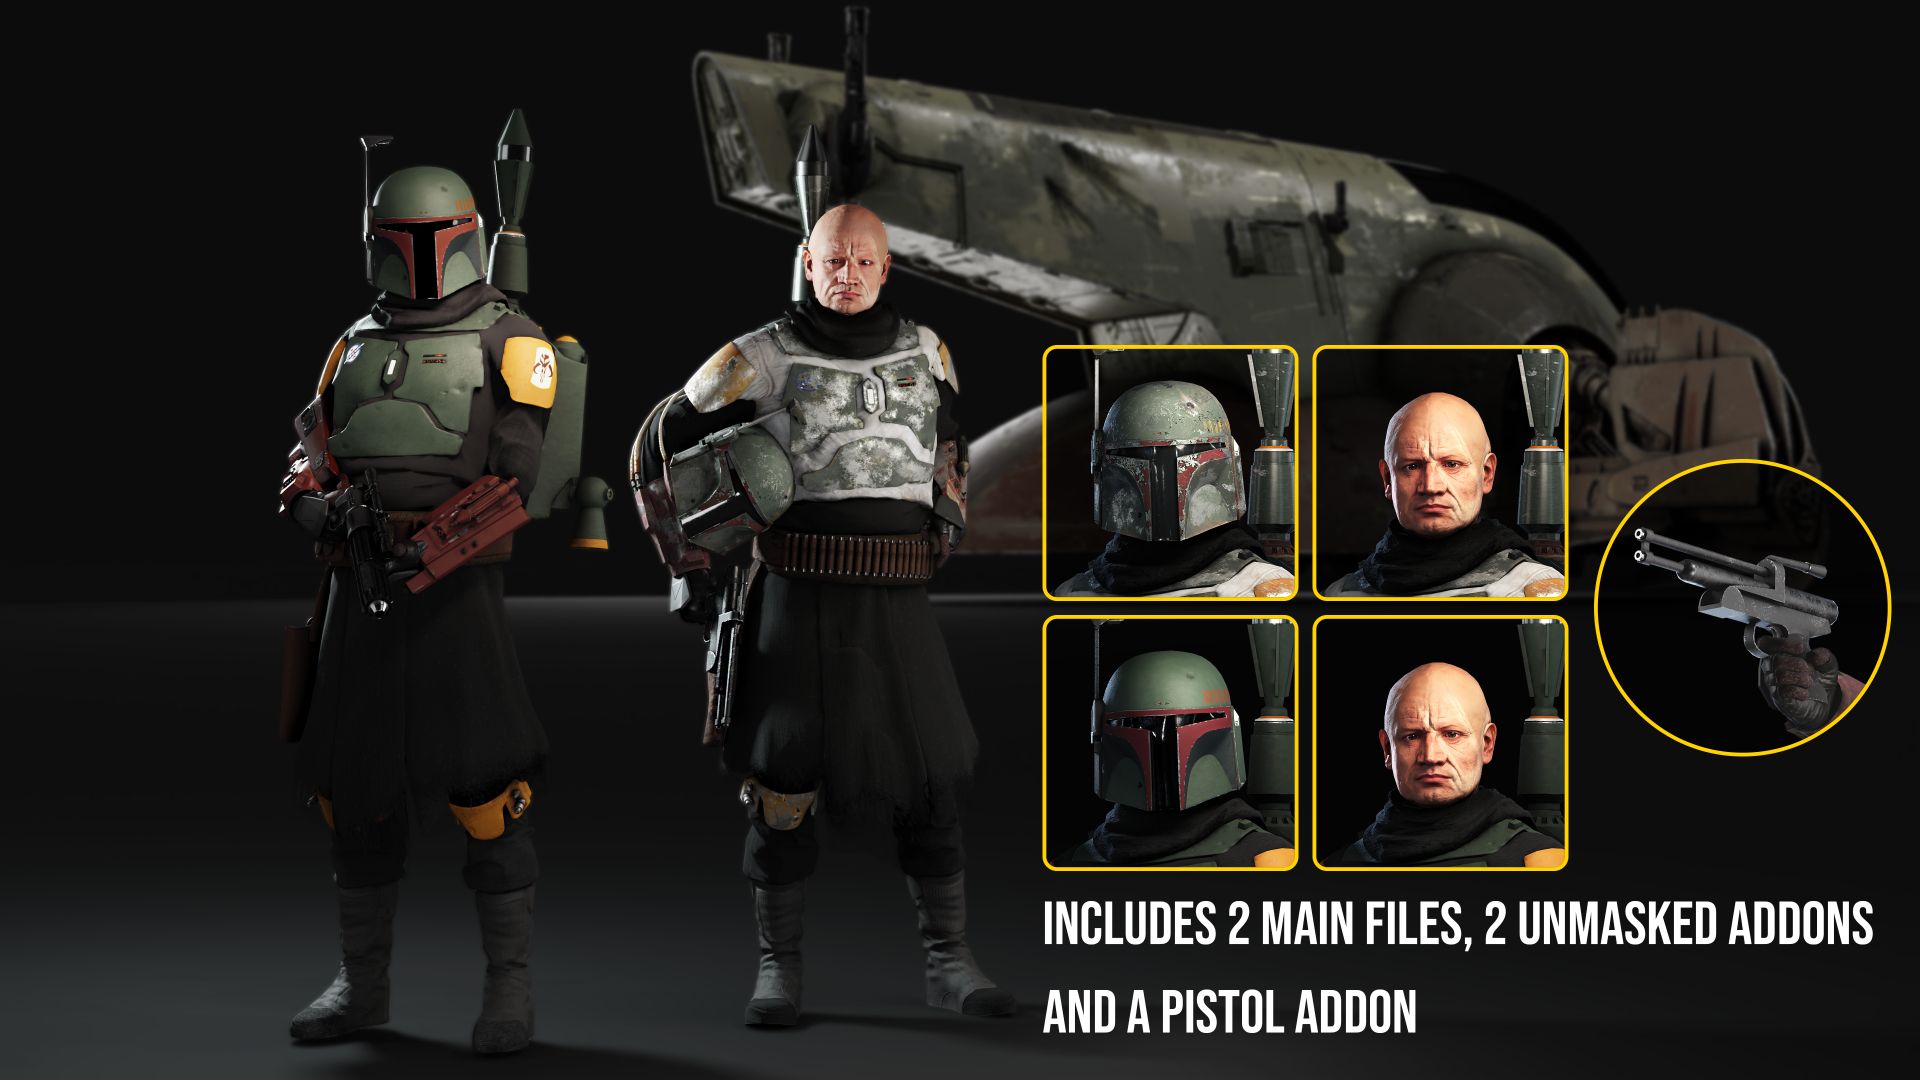 Star Wars Battlefront 2 Mods Add Characters from The Mandalorian Season